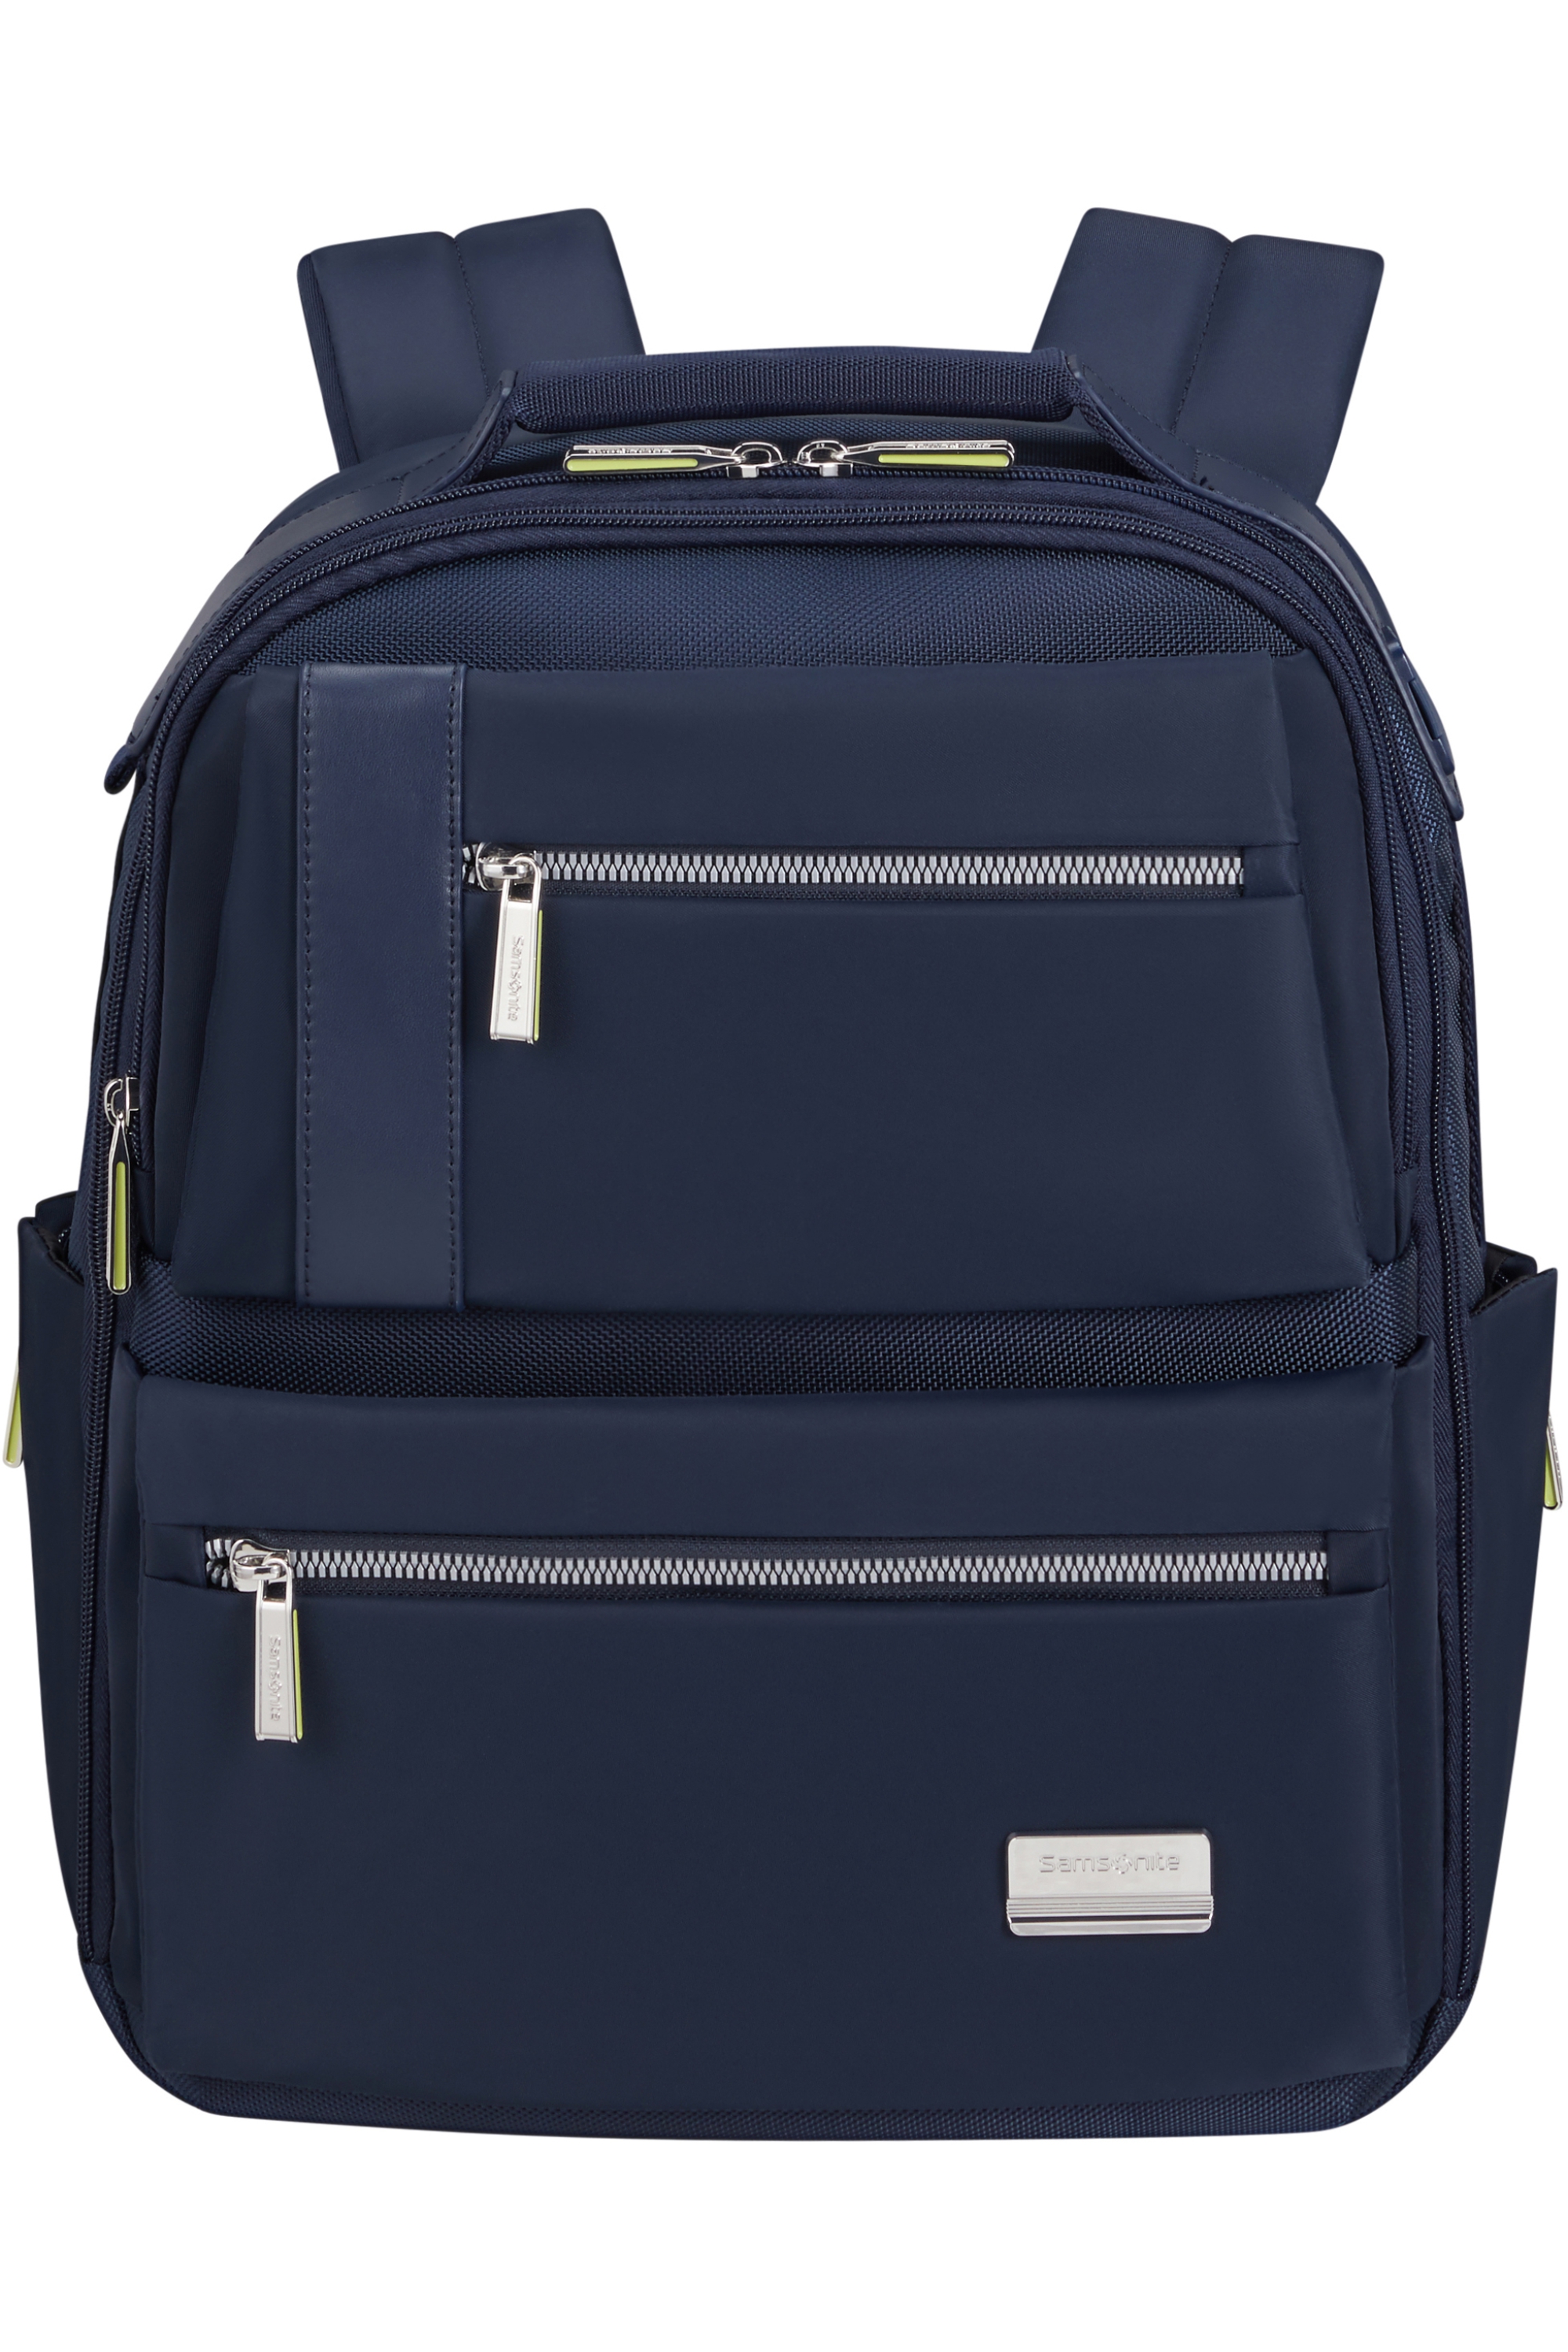 139459-7769-139459_7769_openroad_chic_2-0_backpack_13-3_front-4718754a-9a4a-4744-98f1-ad5900847a2b-png